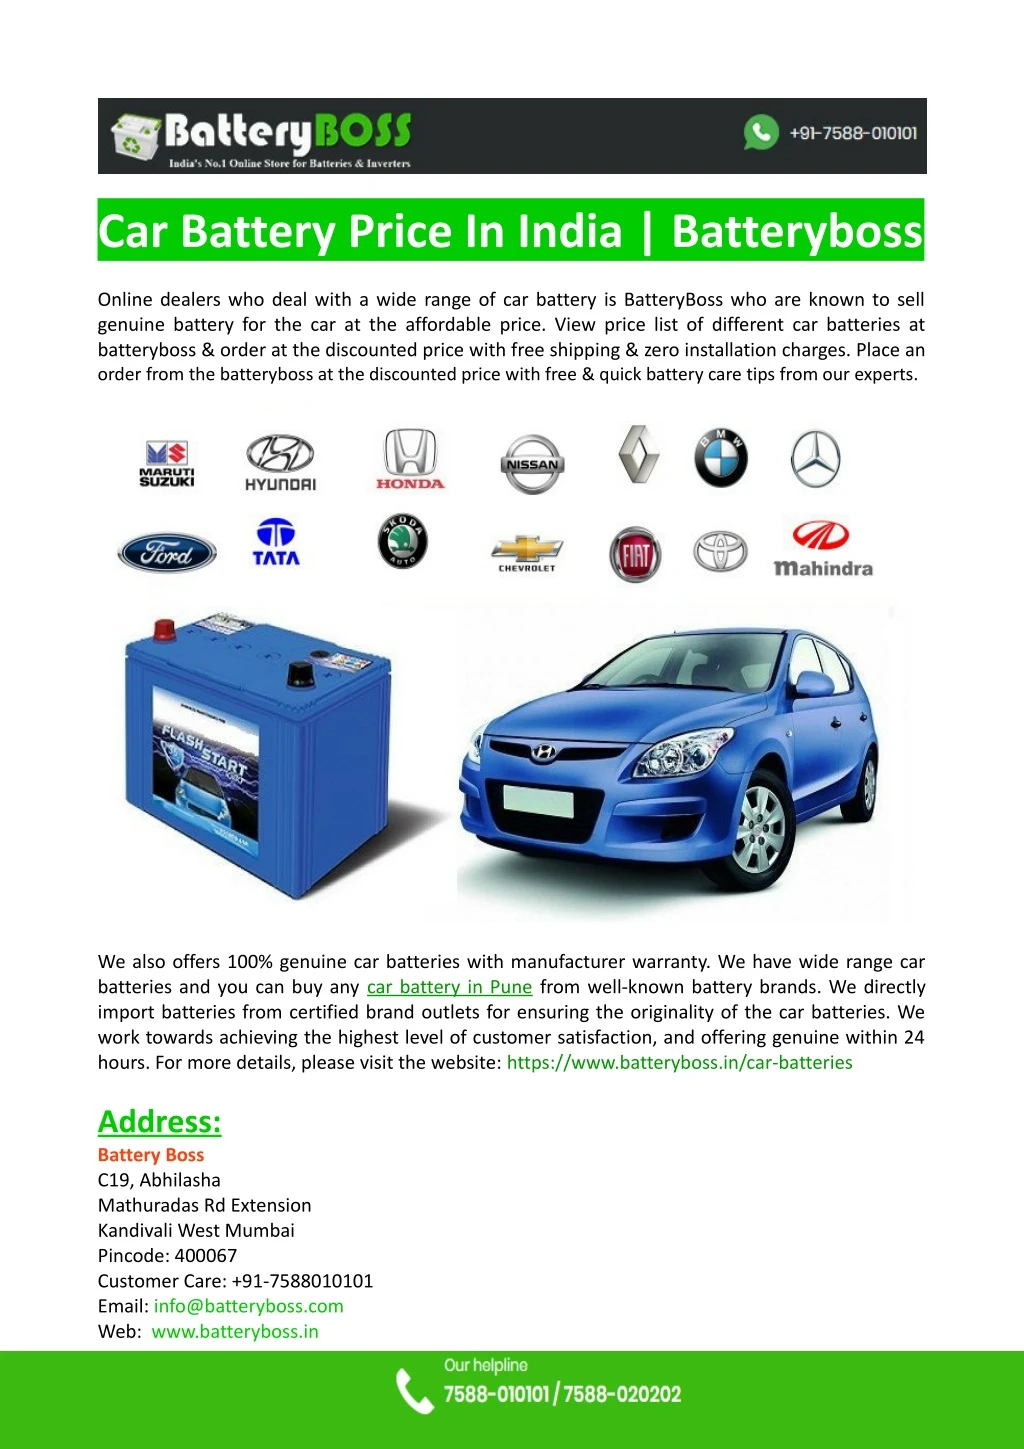 car battery price in india batteryboss